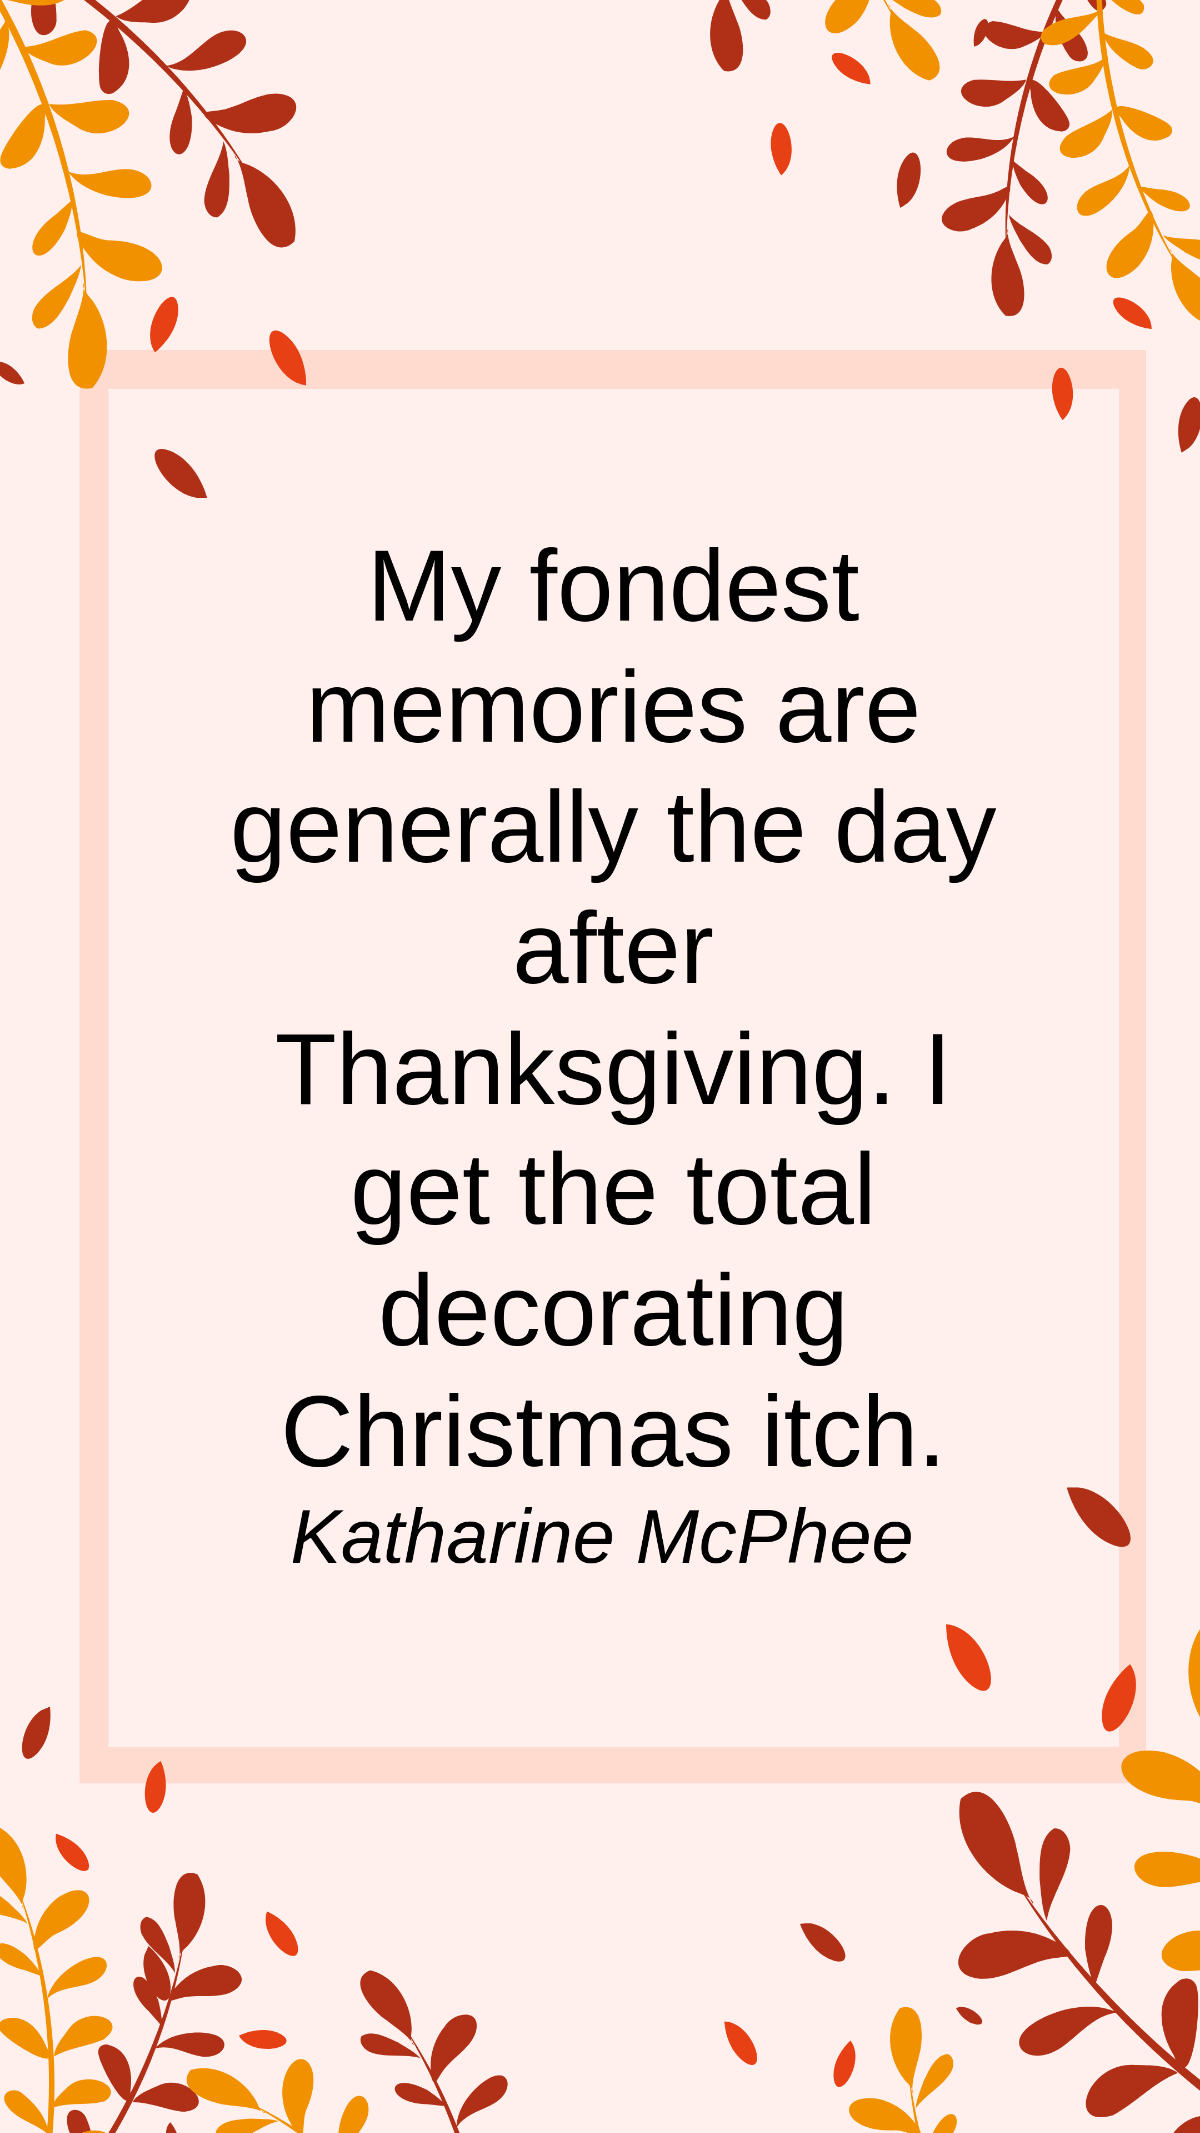 Katharine McPhee - My fondest memories are generally the day after Thanksgiving. I get the total decorating Christmas itch. Template